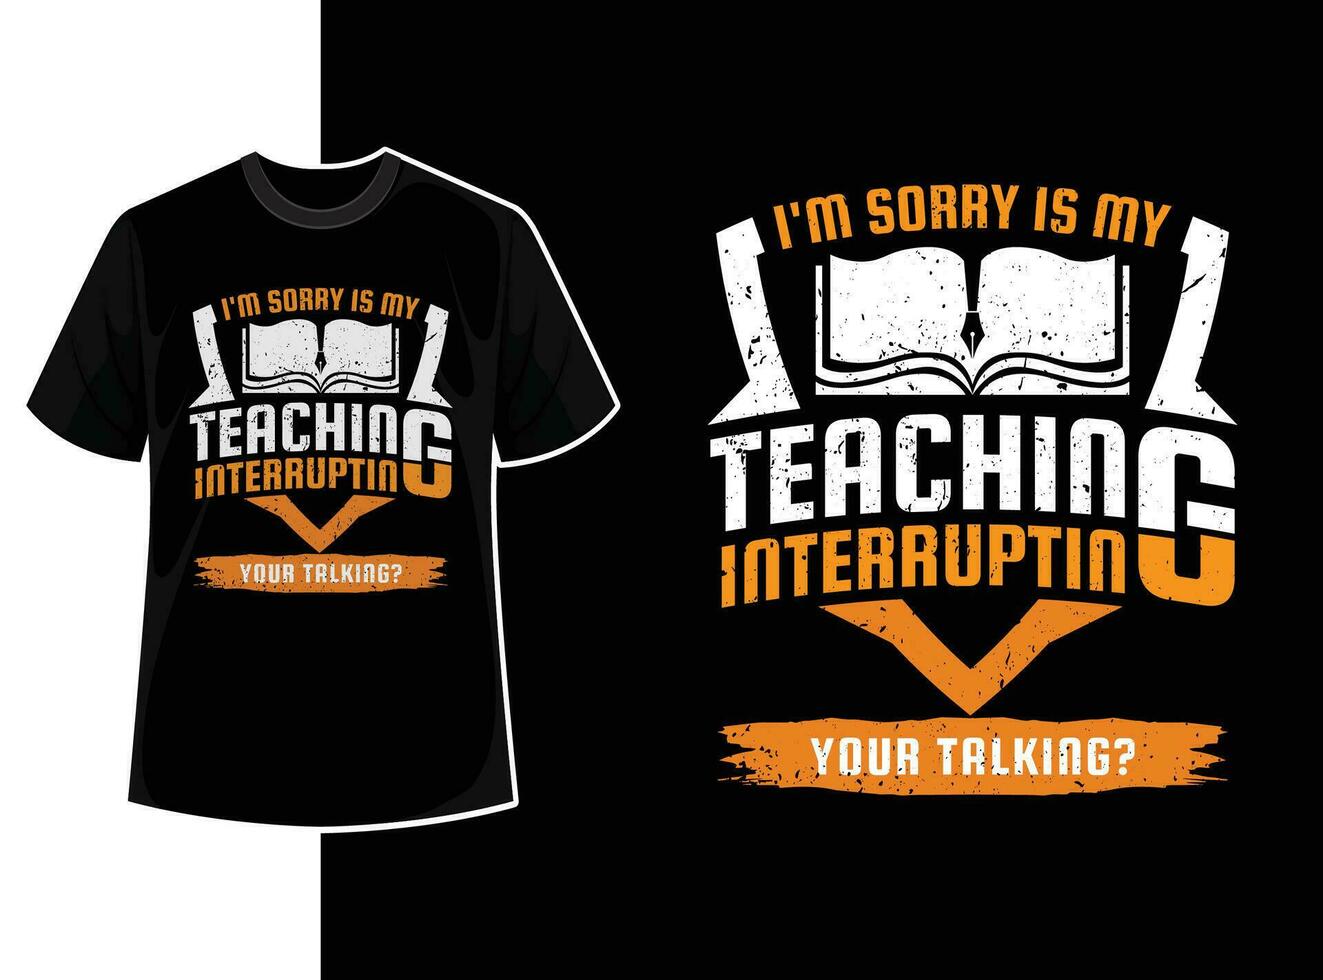 Vintage typography teacher t shirt design template with teacher day motivation quote and vector